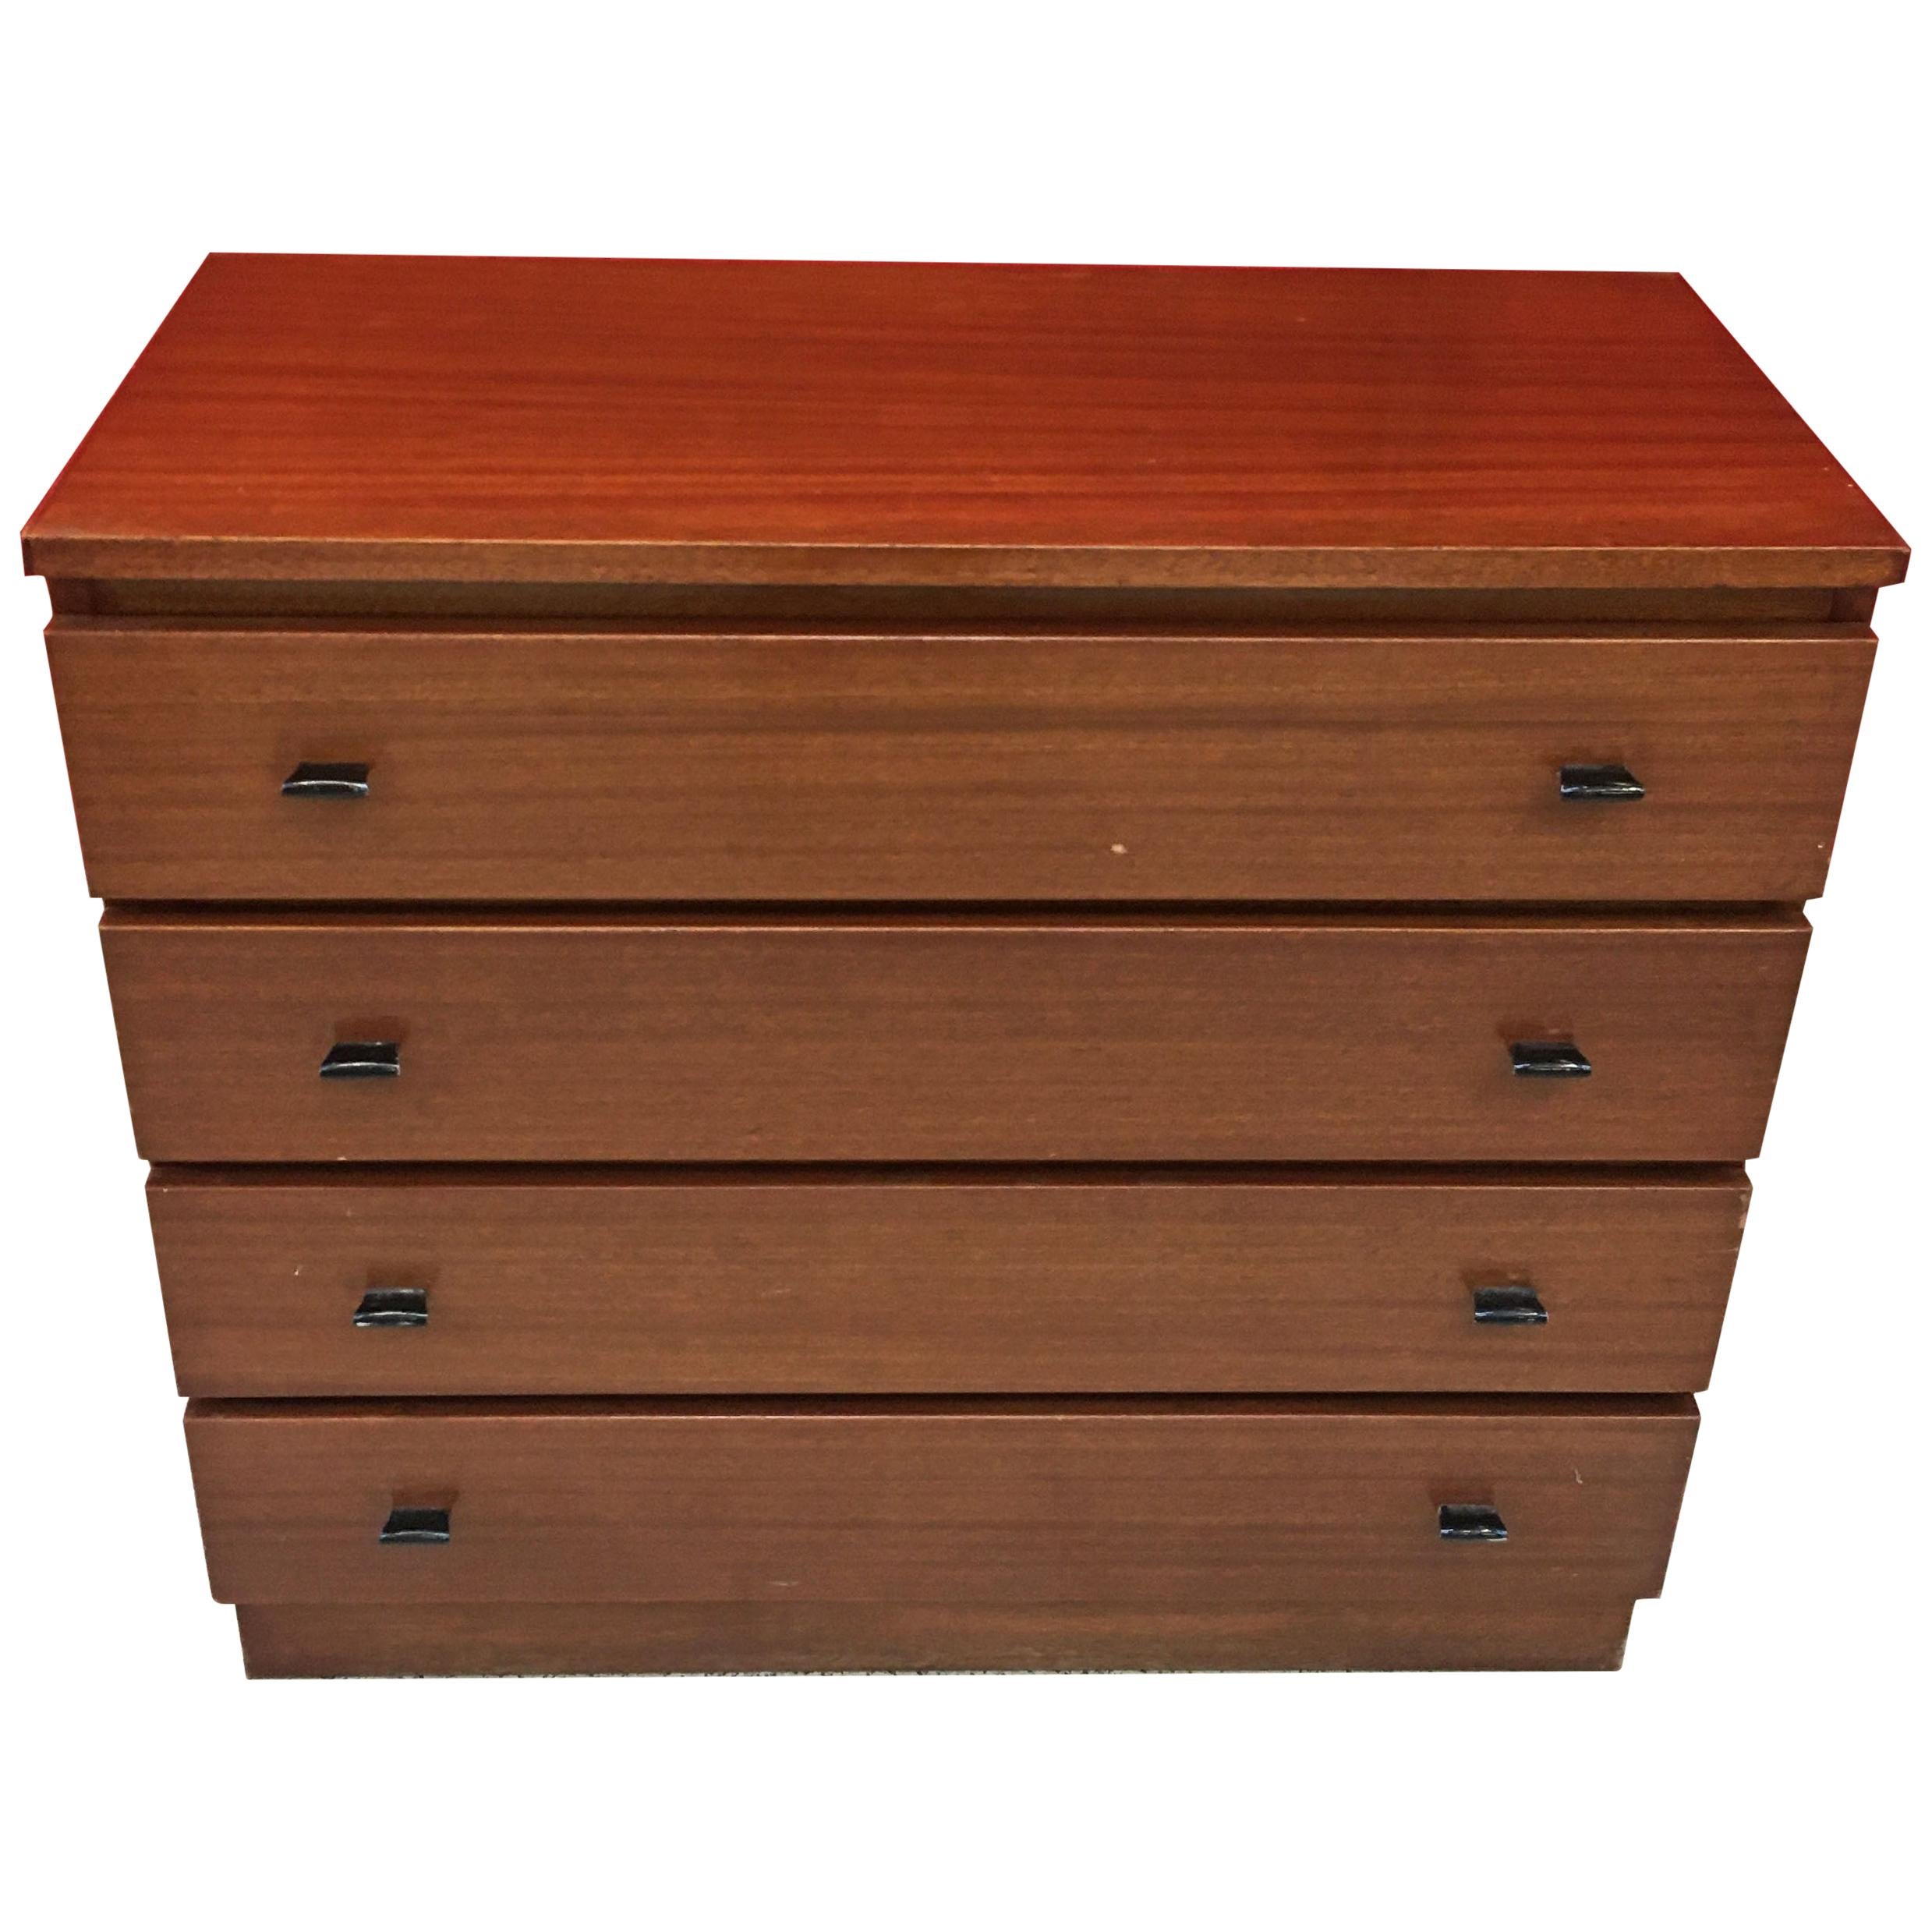 Typical French Chest of Drawers circa 1960 in Mahogany, Lacquered Metal Handles